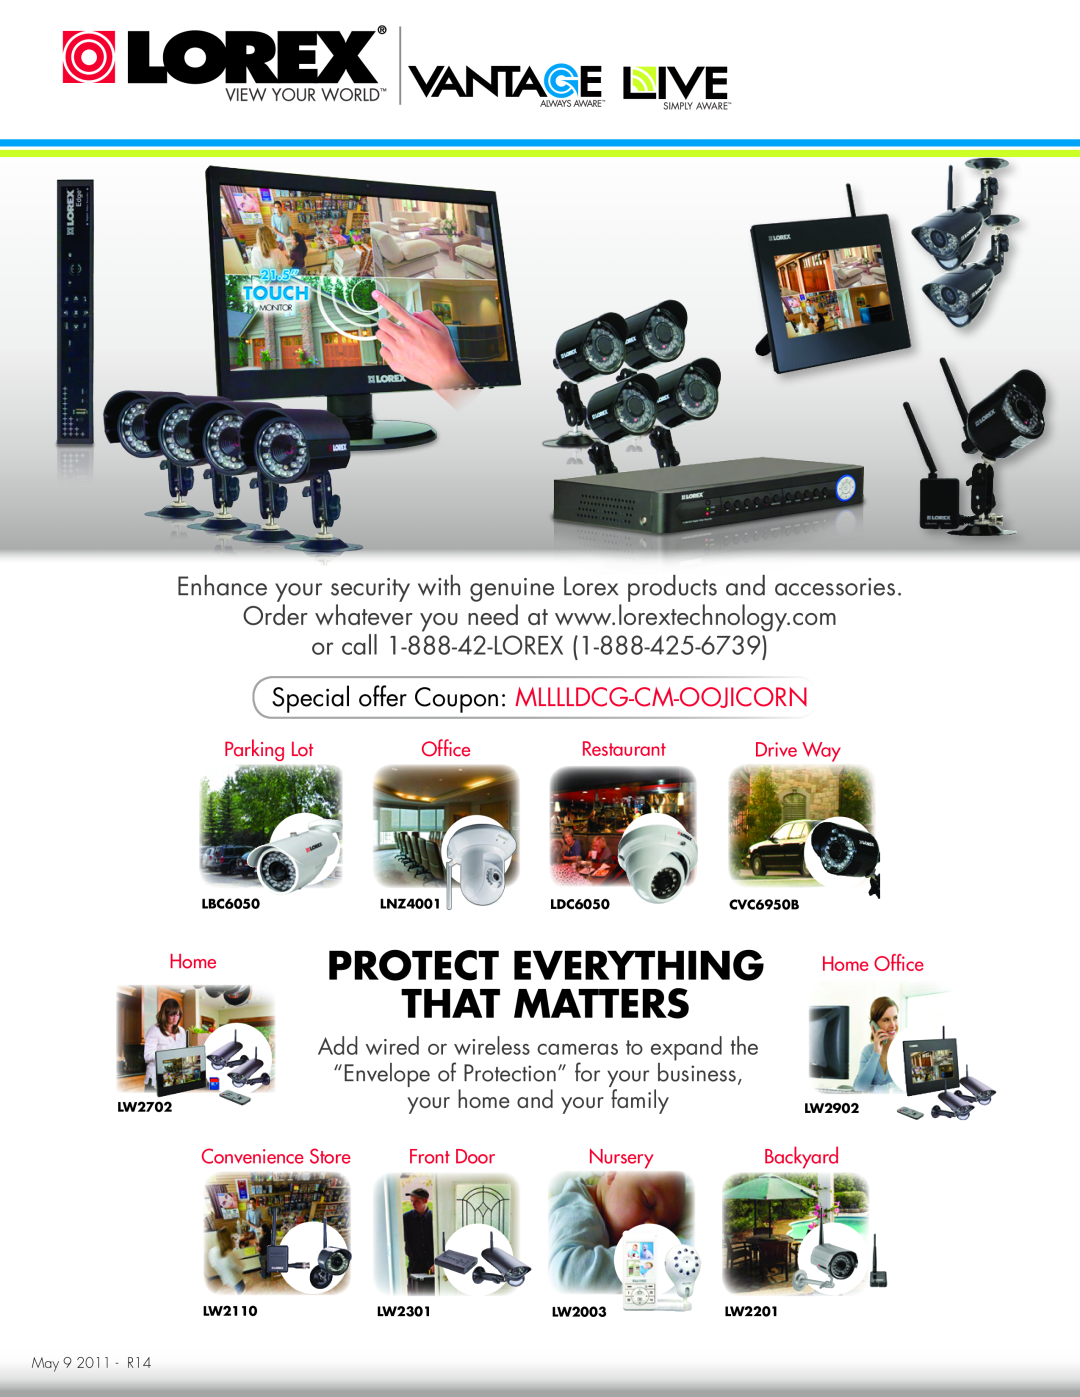 LOREX Technology LW2110 Special offer Coupon MLLLLDCG-CM-OOJICORN, PROTECT EVERYTHING Home Office THAT MATTERS, Restaurant 